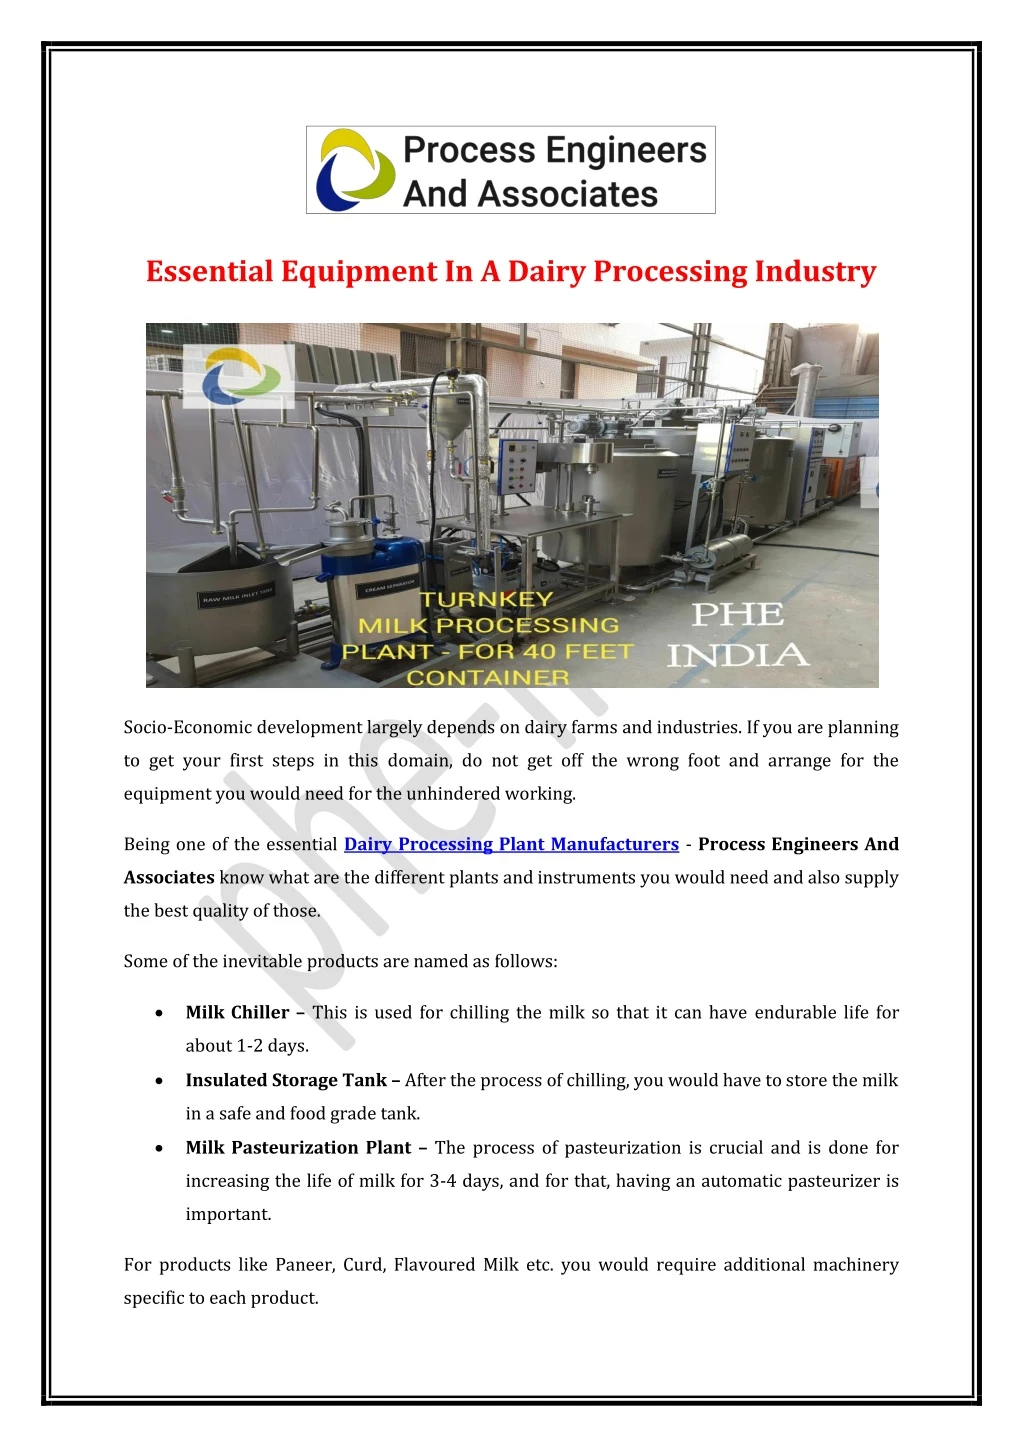 essential equipment in a dairy processing industry